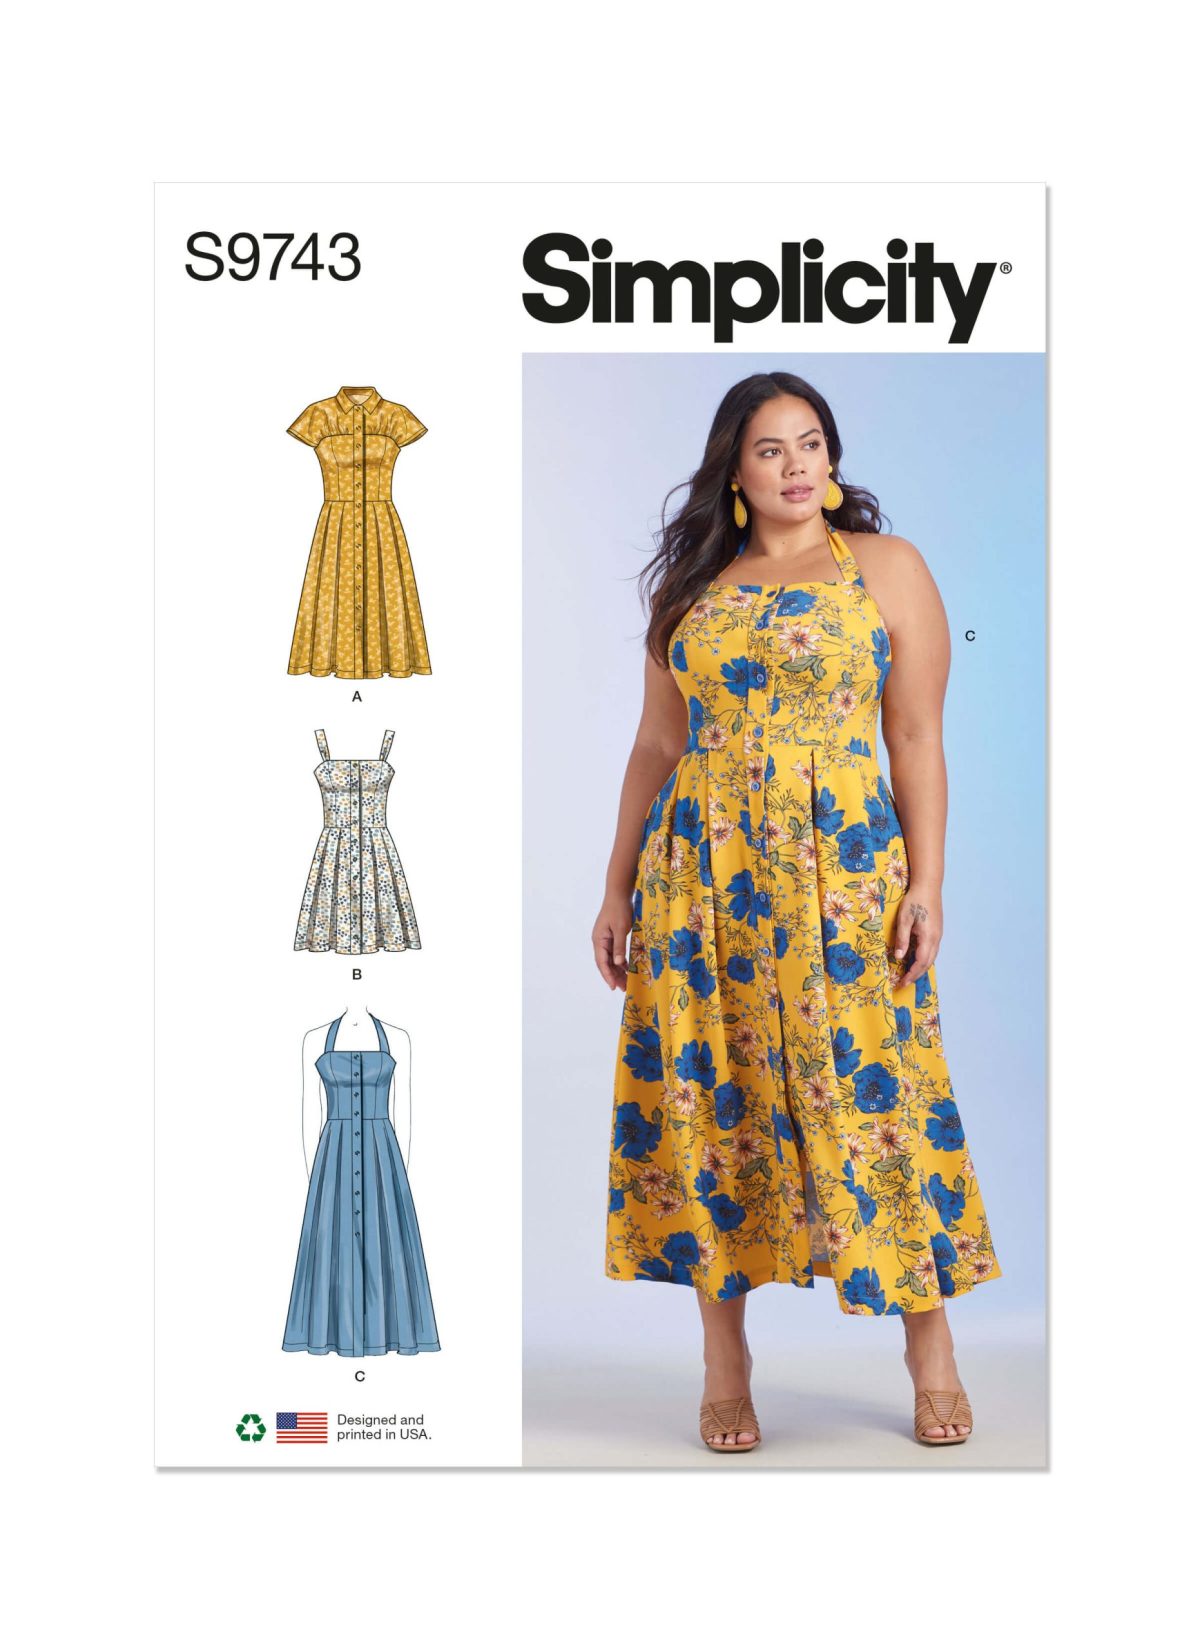 Simplicity Sewing Pattern S9743 Women's Dresses - Sewdirect